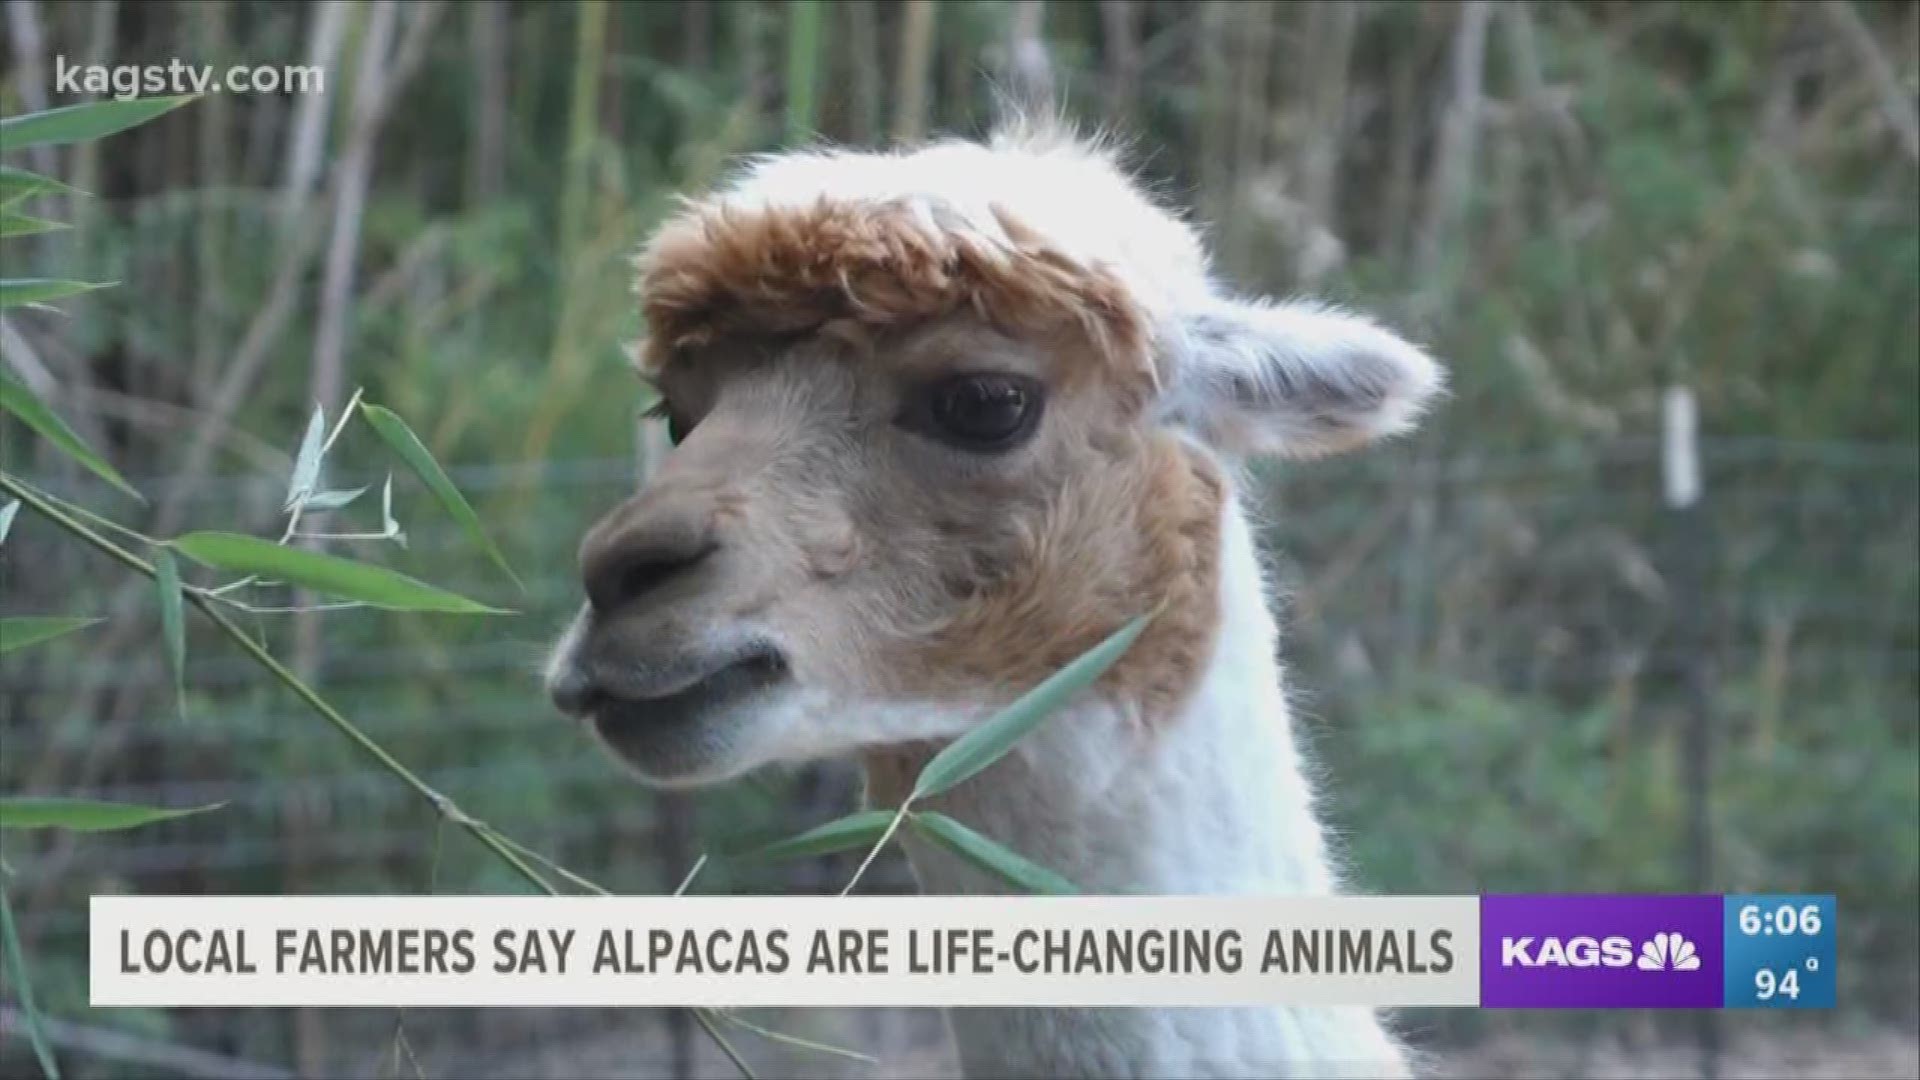 Donna and Alex Lamarche never thought they'd own a farm, much less own a herd of alpacas but after their son Michael Lamarche suffered permanent brain damage from a car accident at 16, Donna and Alex knew they had to make big changes to their lives.